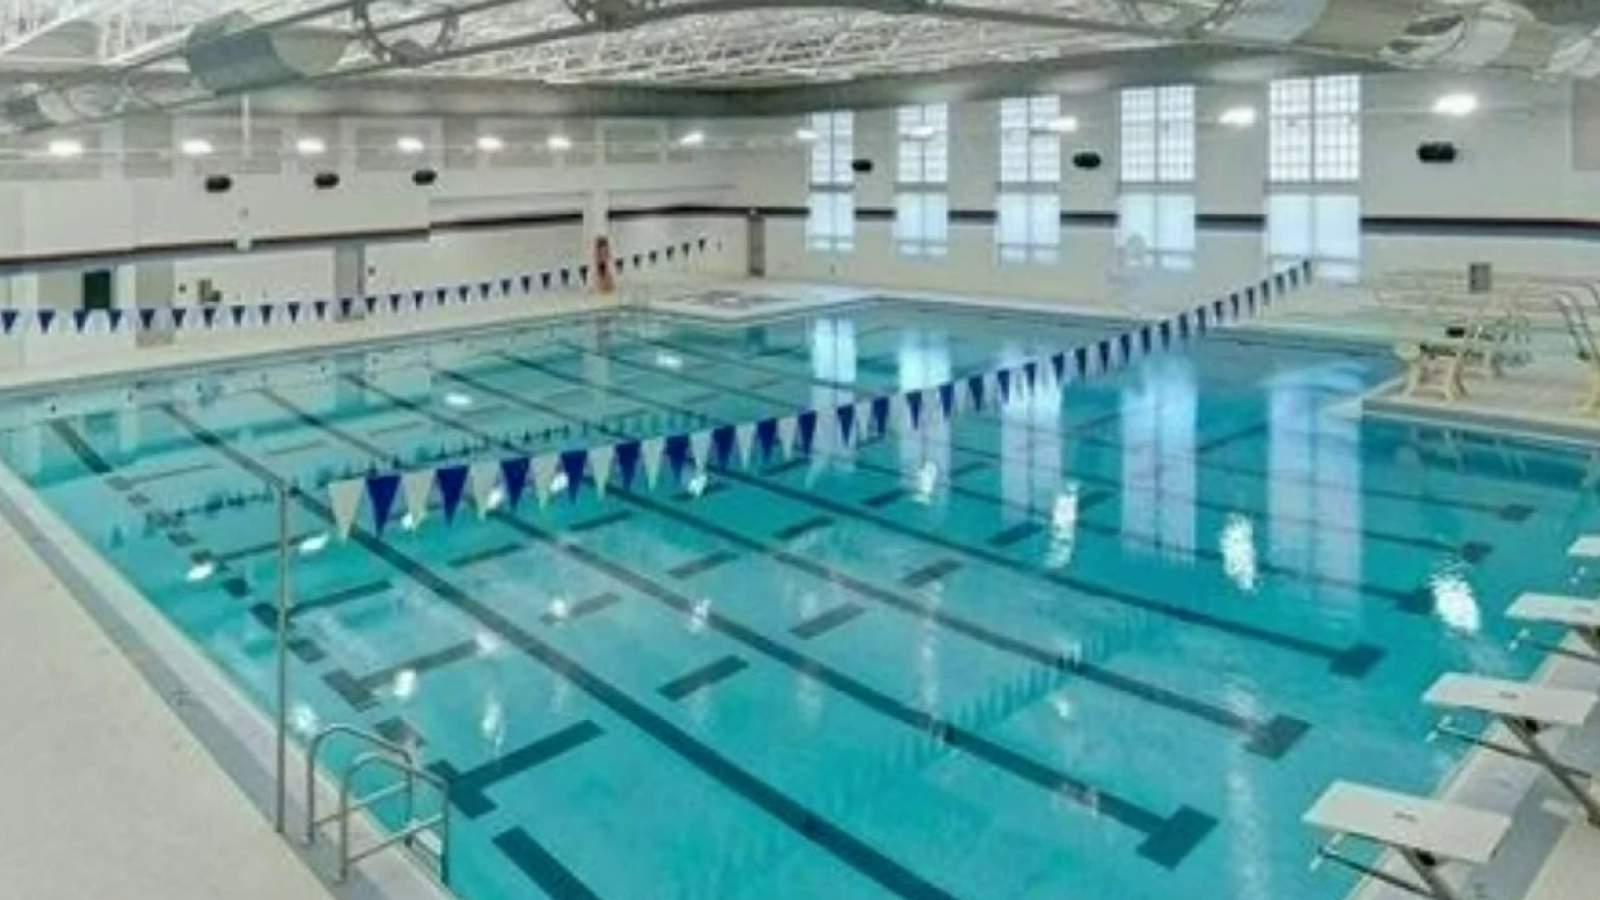 Detroit police send warrant request to investigate drowning death at high school